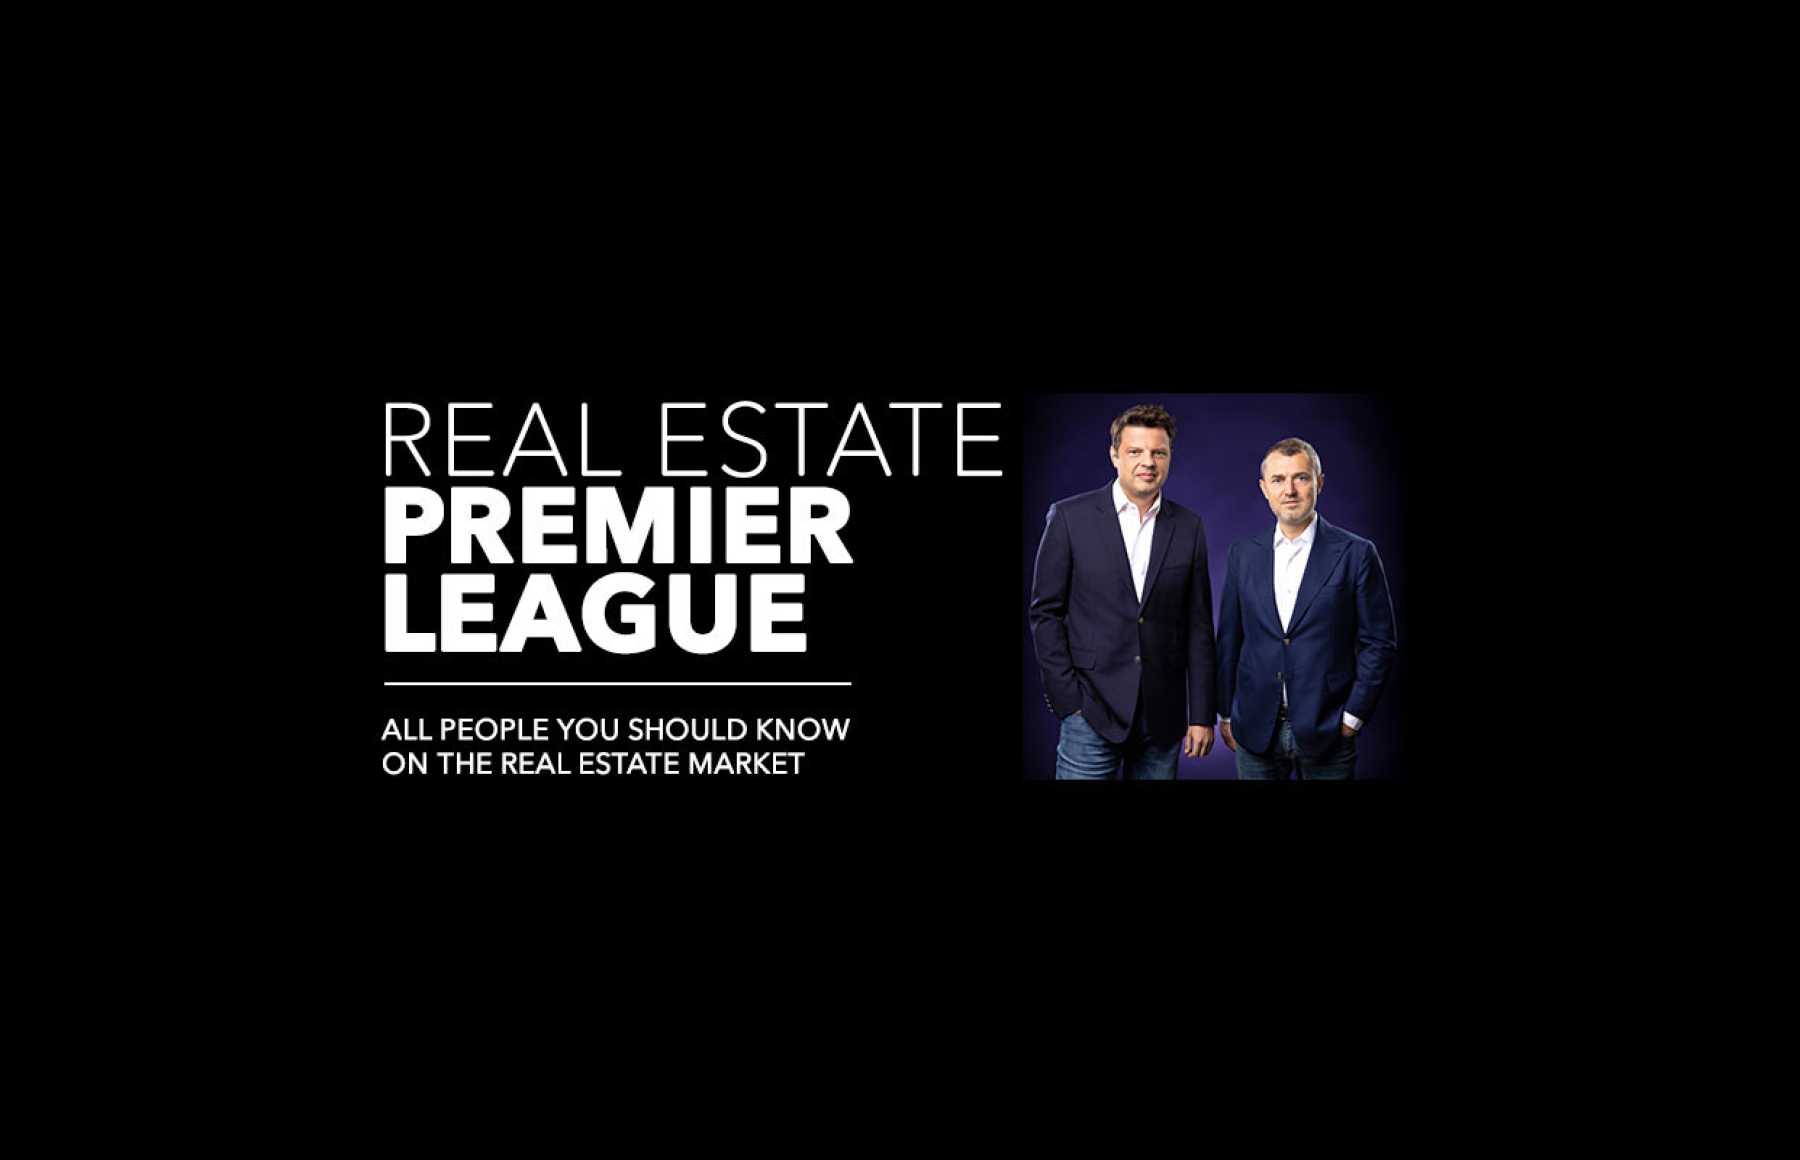 The premier league of the real estate industry in Romania - a BREC Analysis